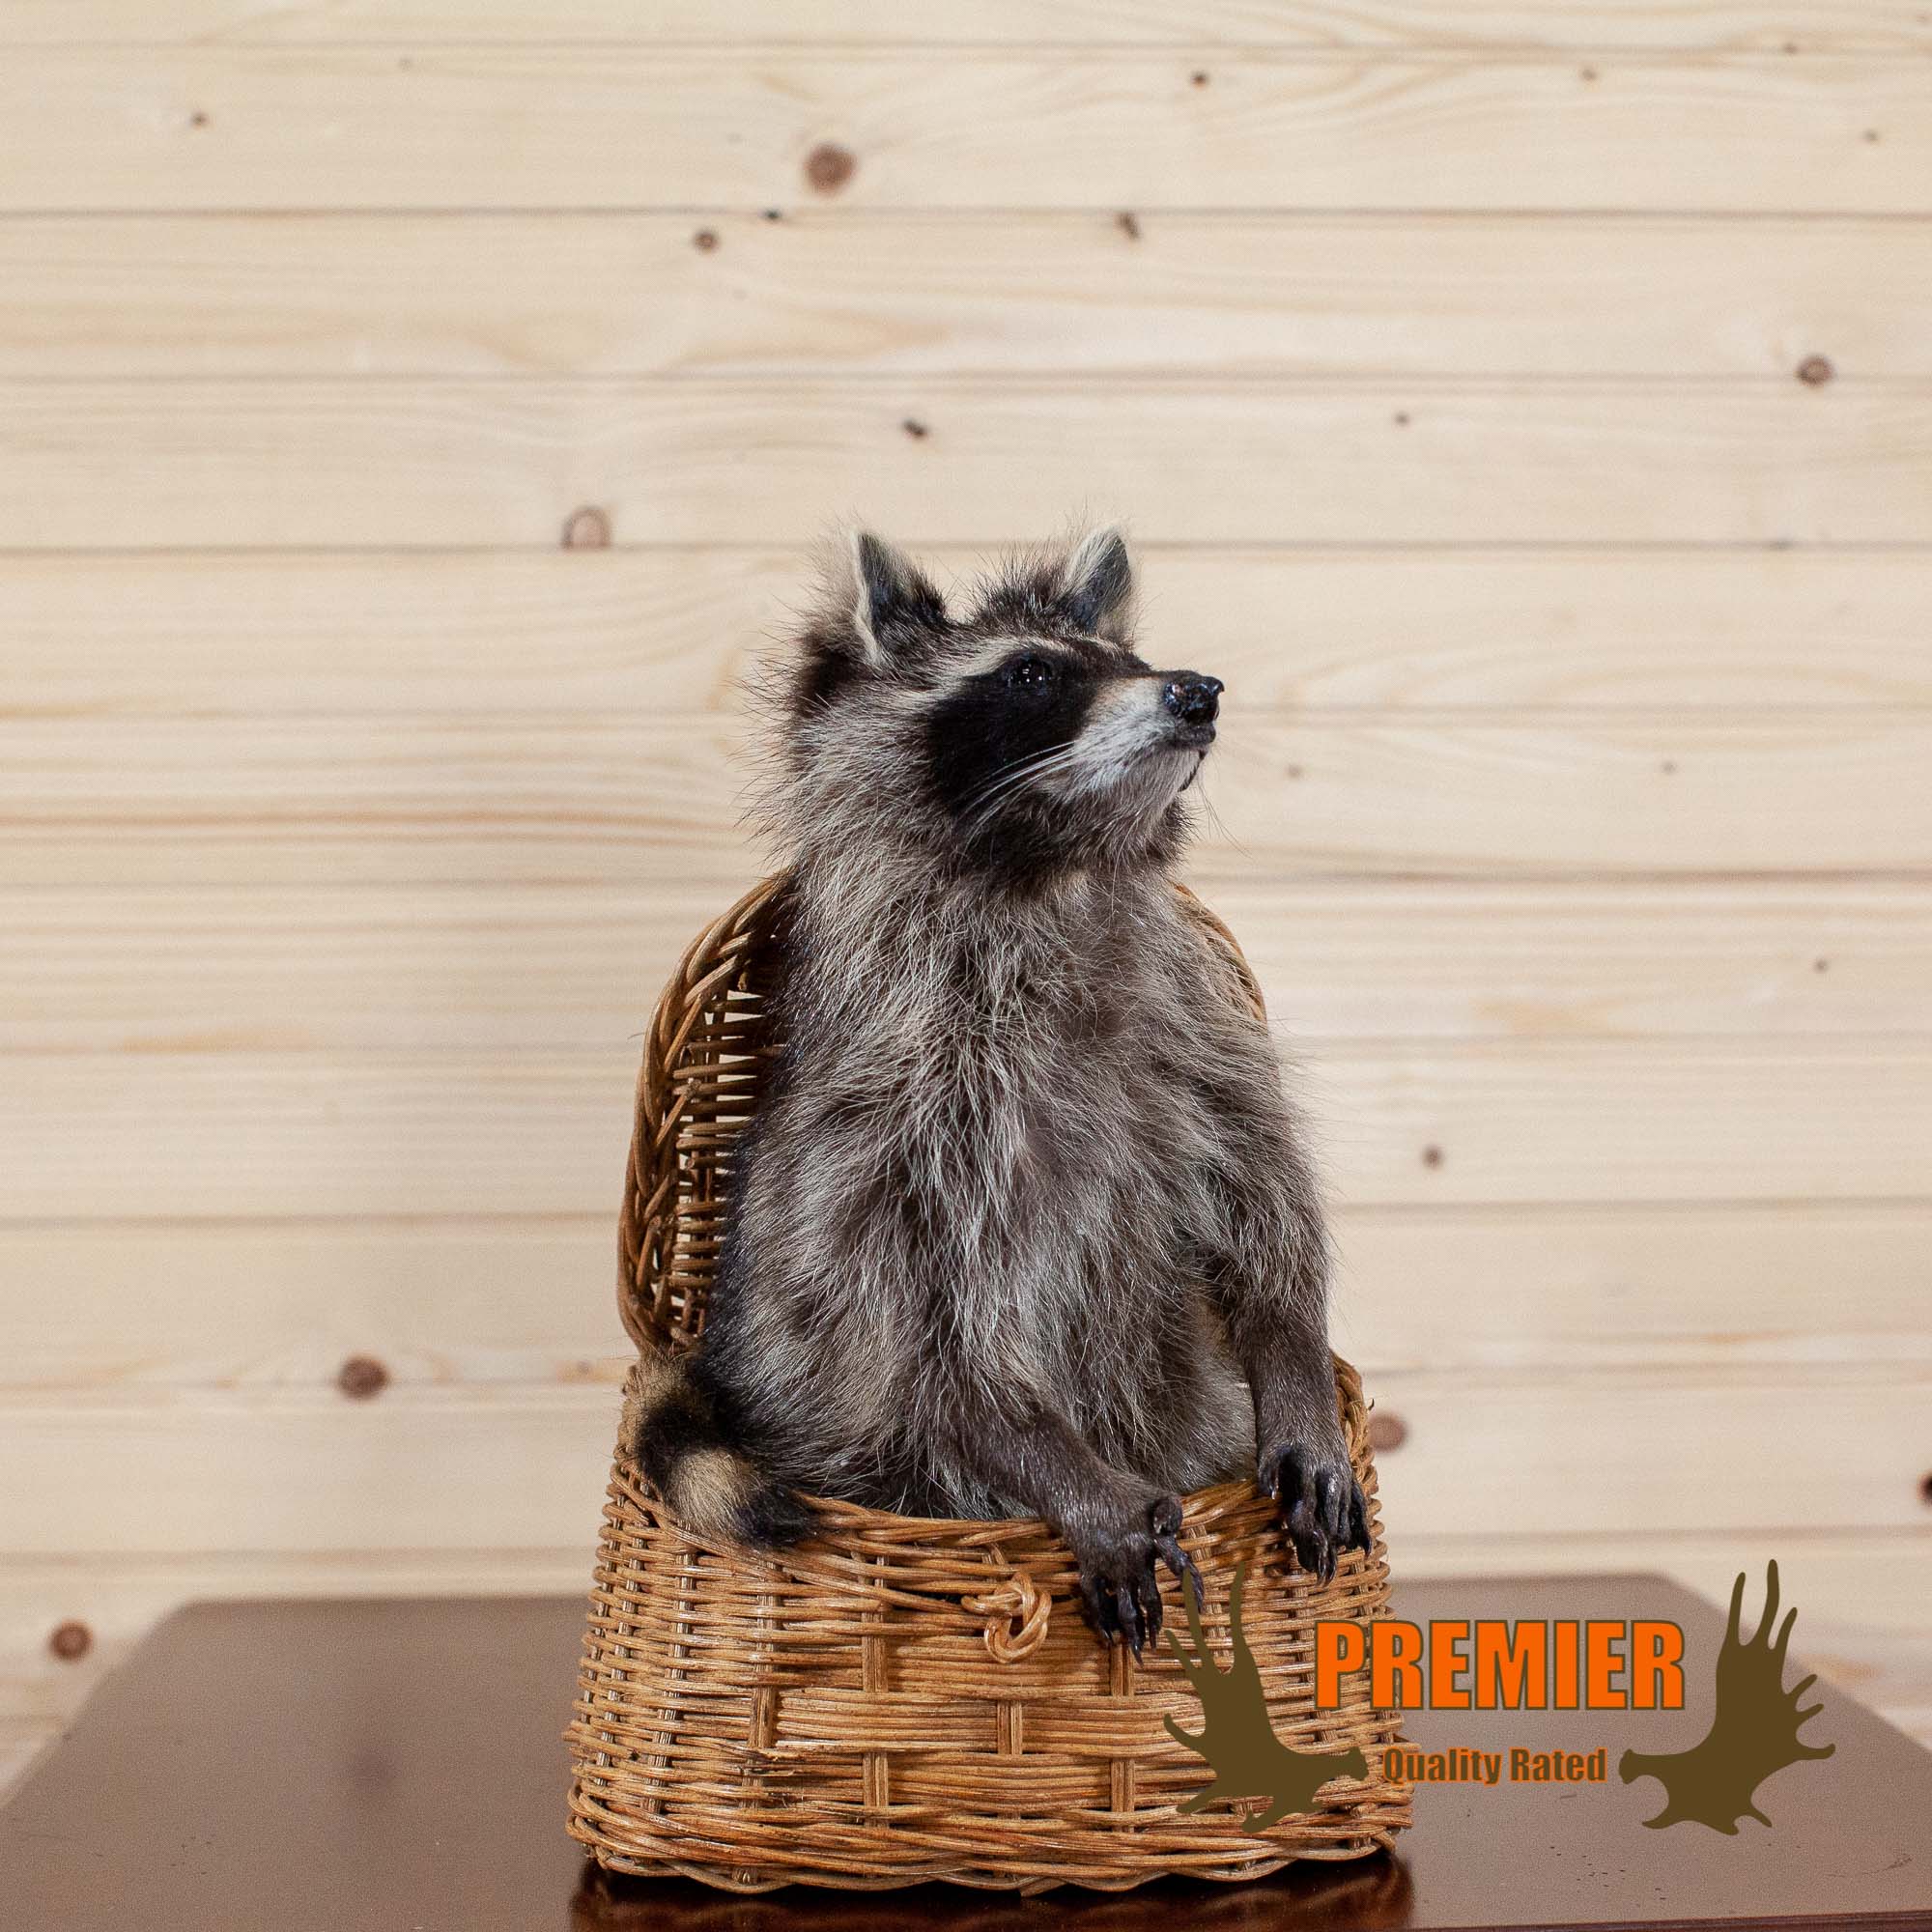 Raccoon with Fishing Creel SW10028 at SafariWorks Decor